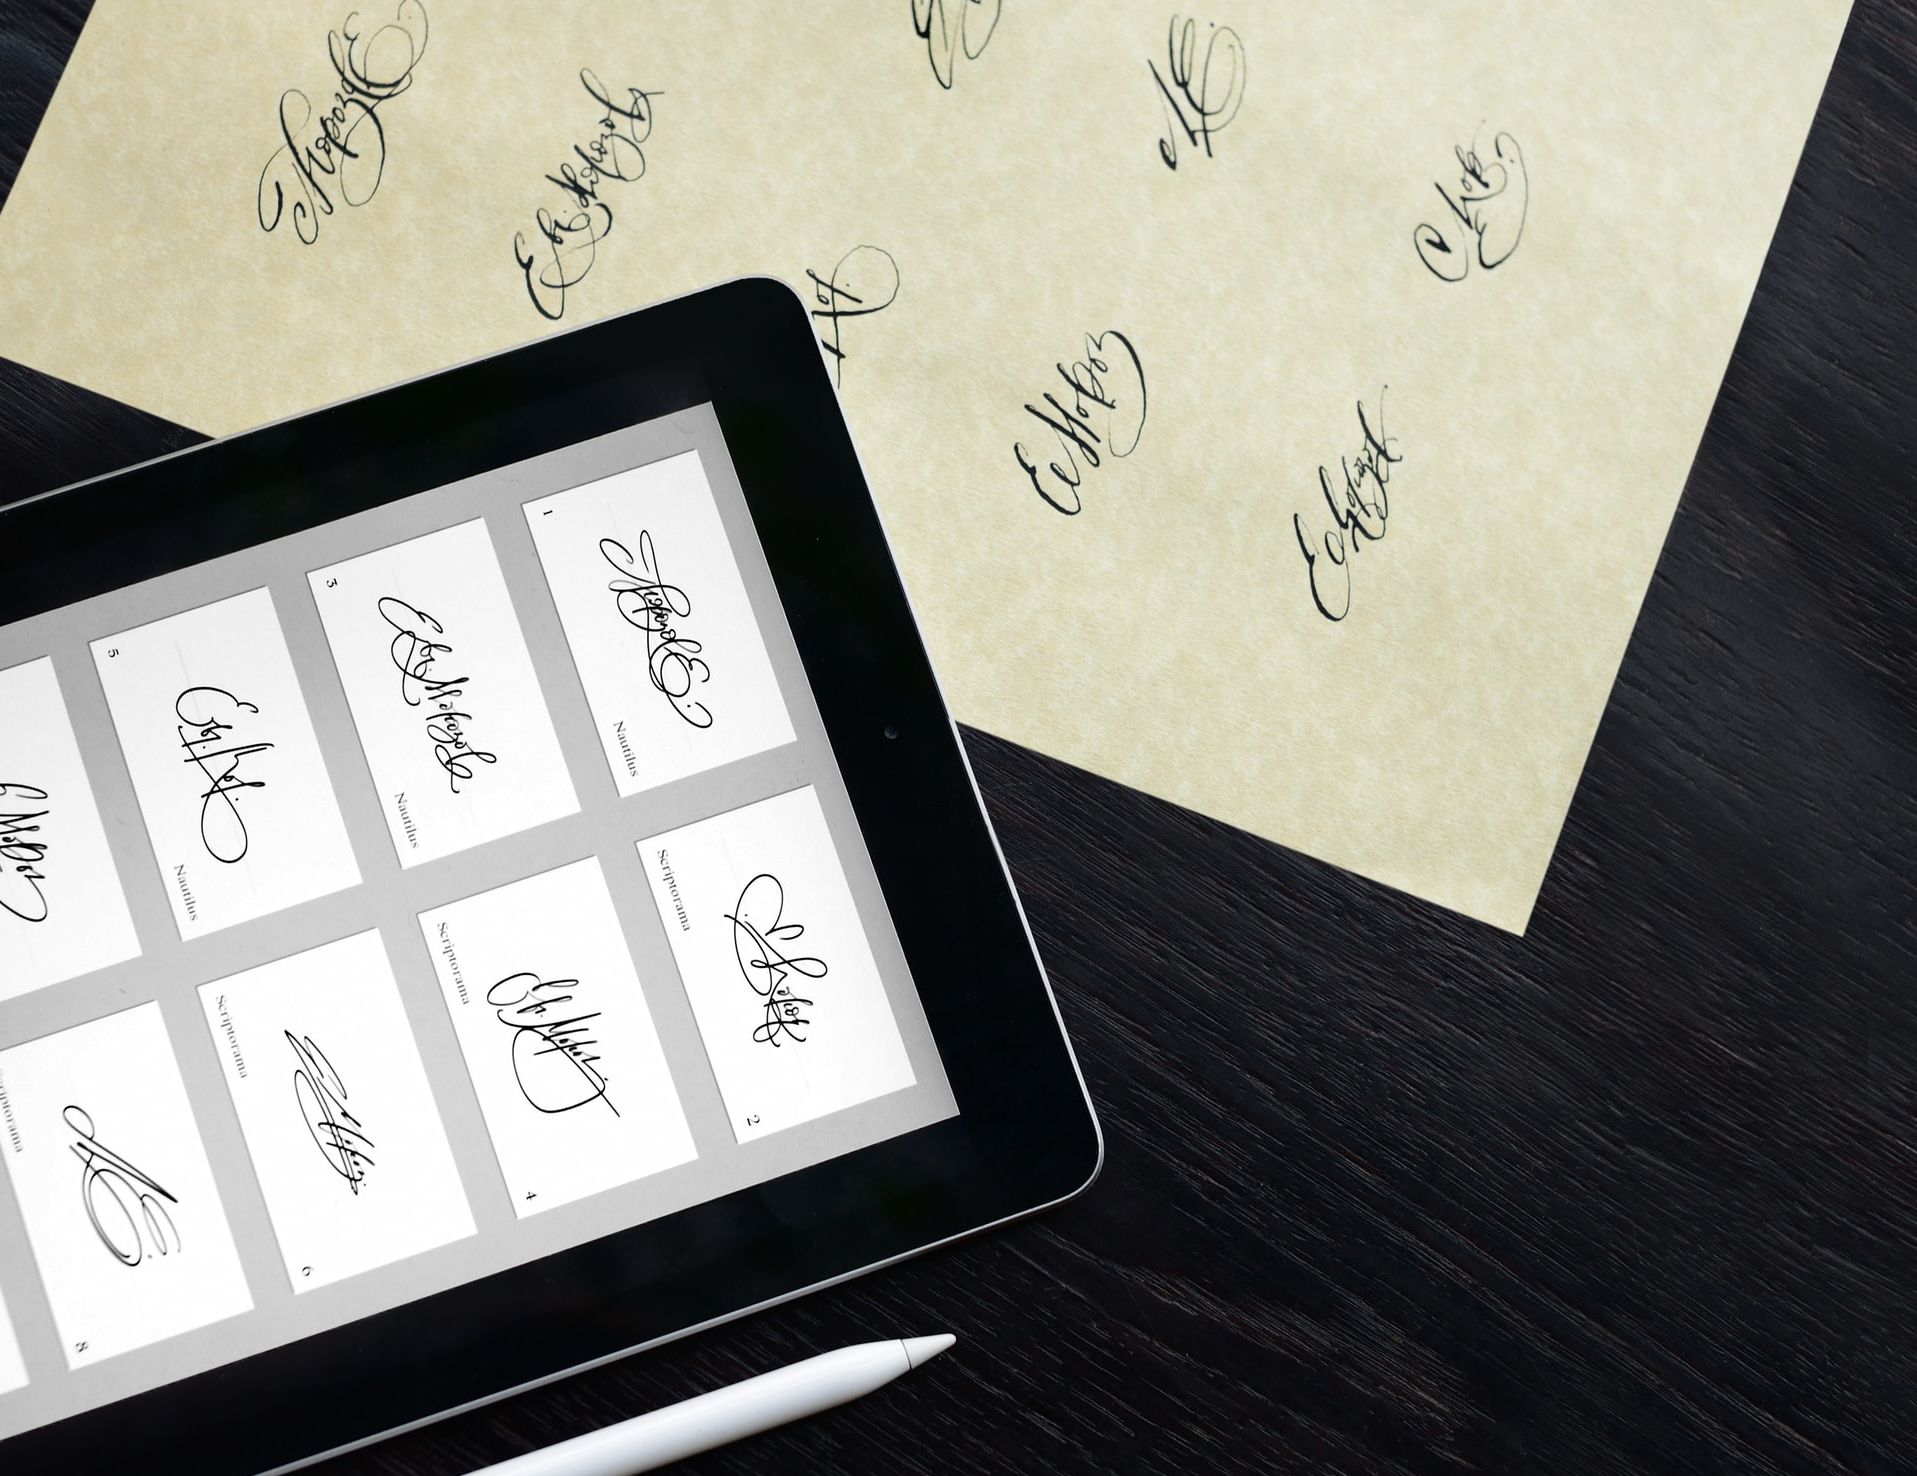 Testing Signatures on Paper and Tablet